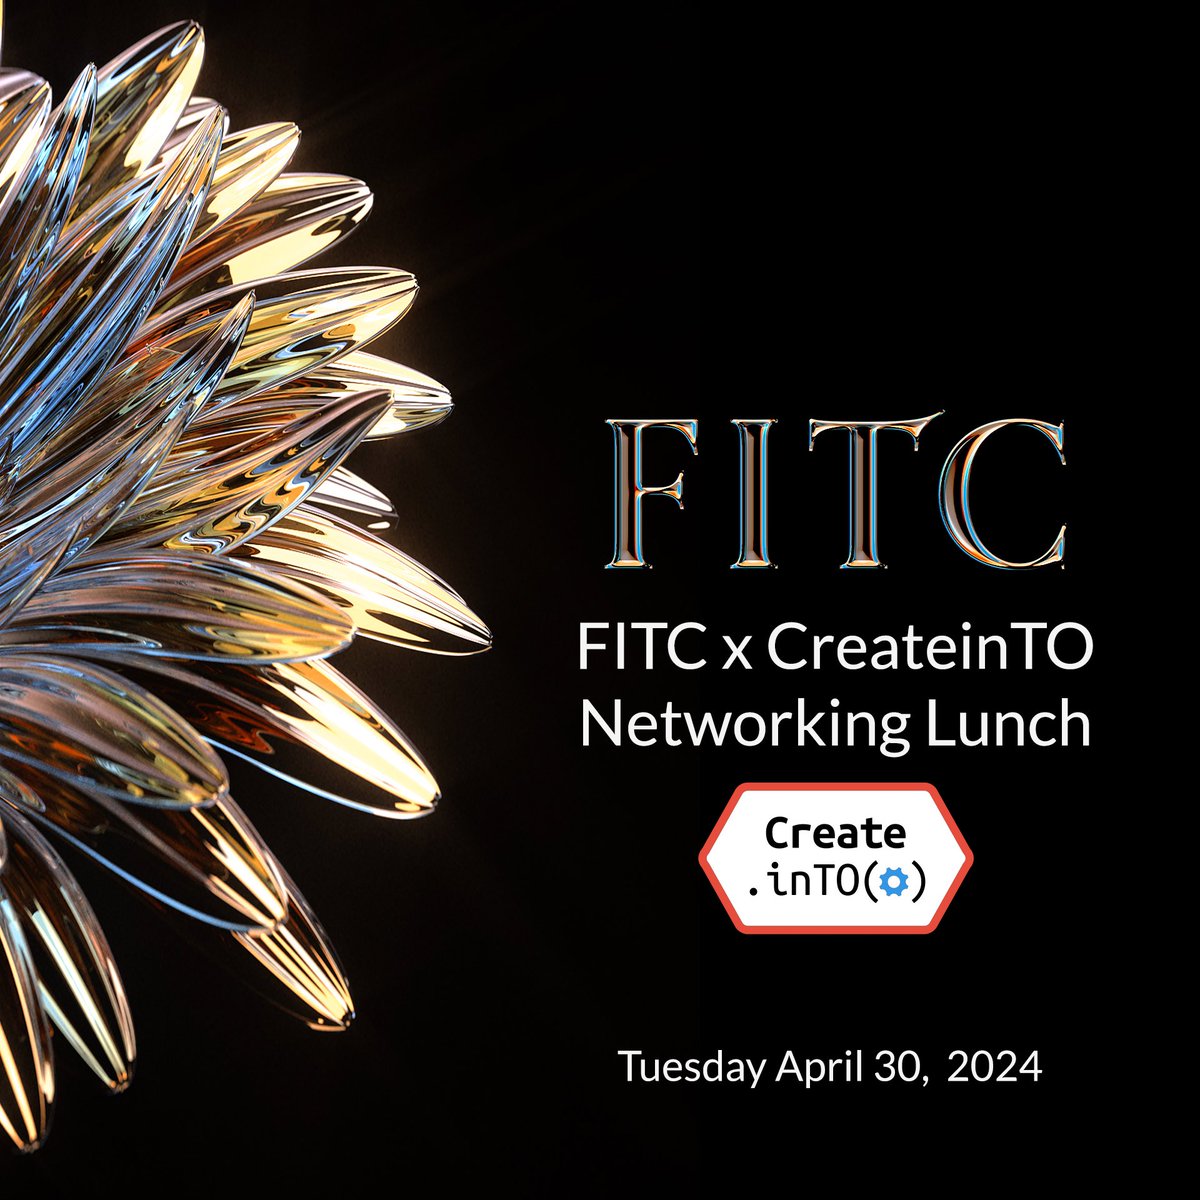 Exciting Announcement! Join us at FITC Toronto for exclusive networking lunches featuring industry leaders: AI & Creativity, Immersive Design, Spatial Computing and FITC x CreateinTO. Limited spots! Visit fitc.ca/event/to24/